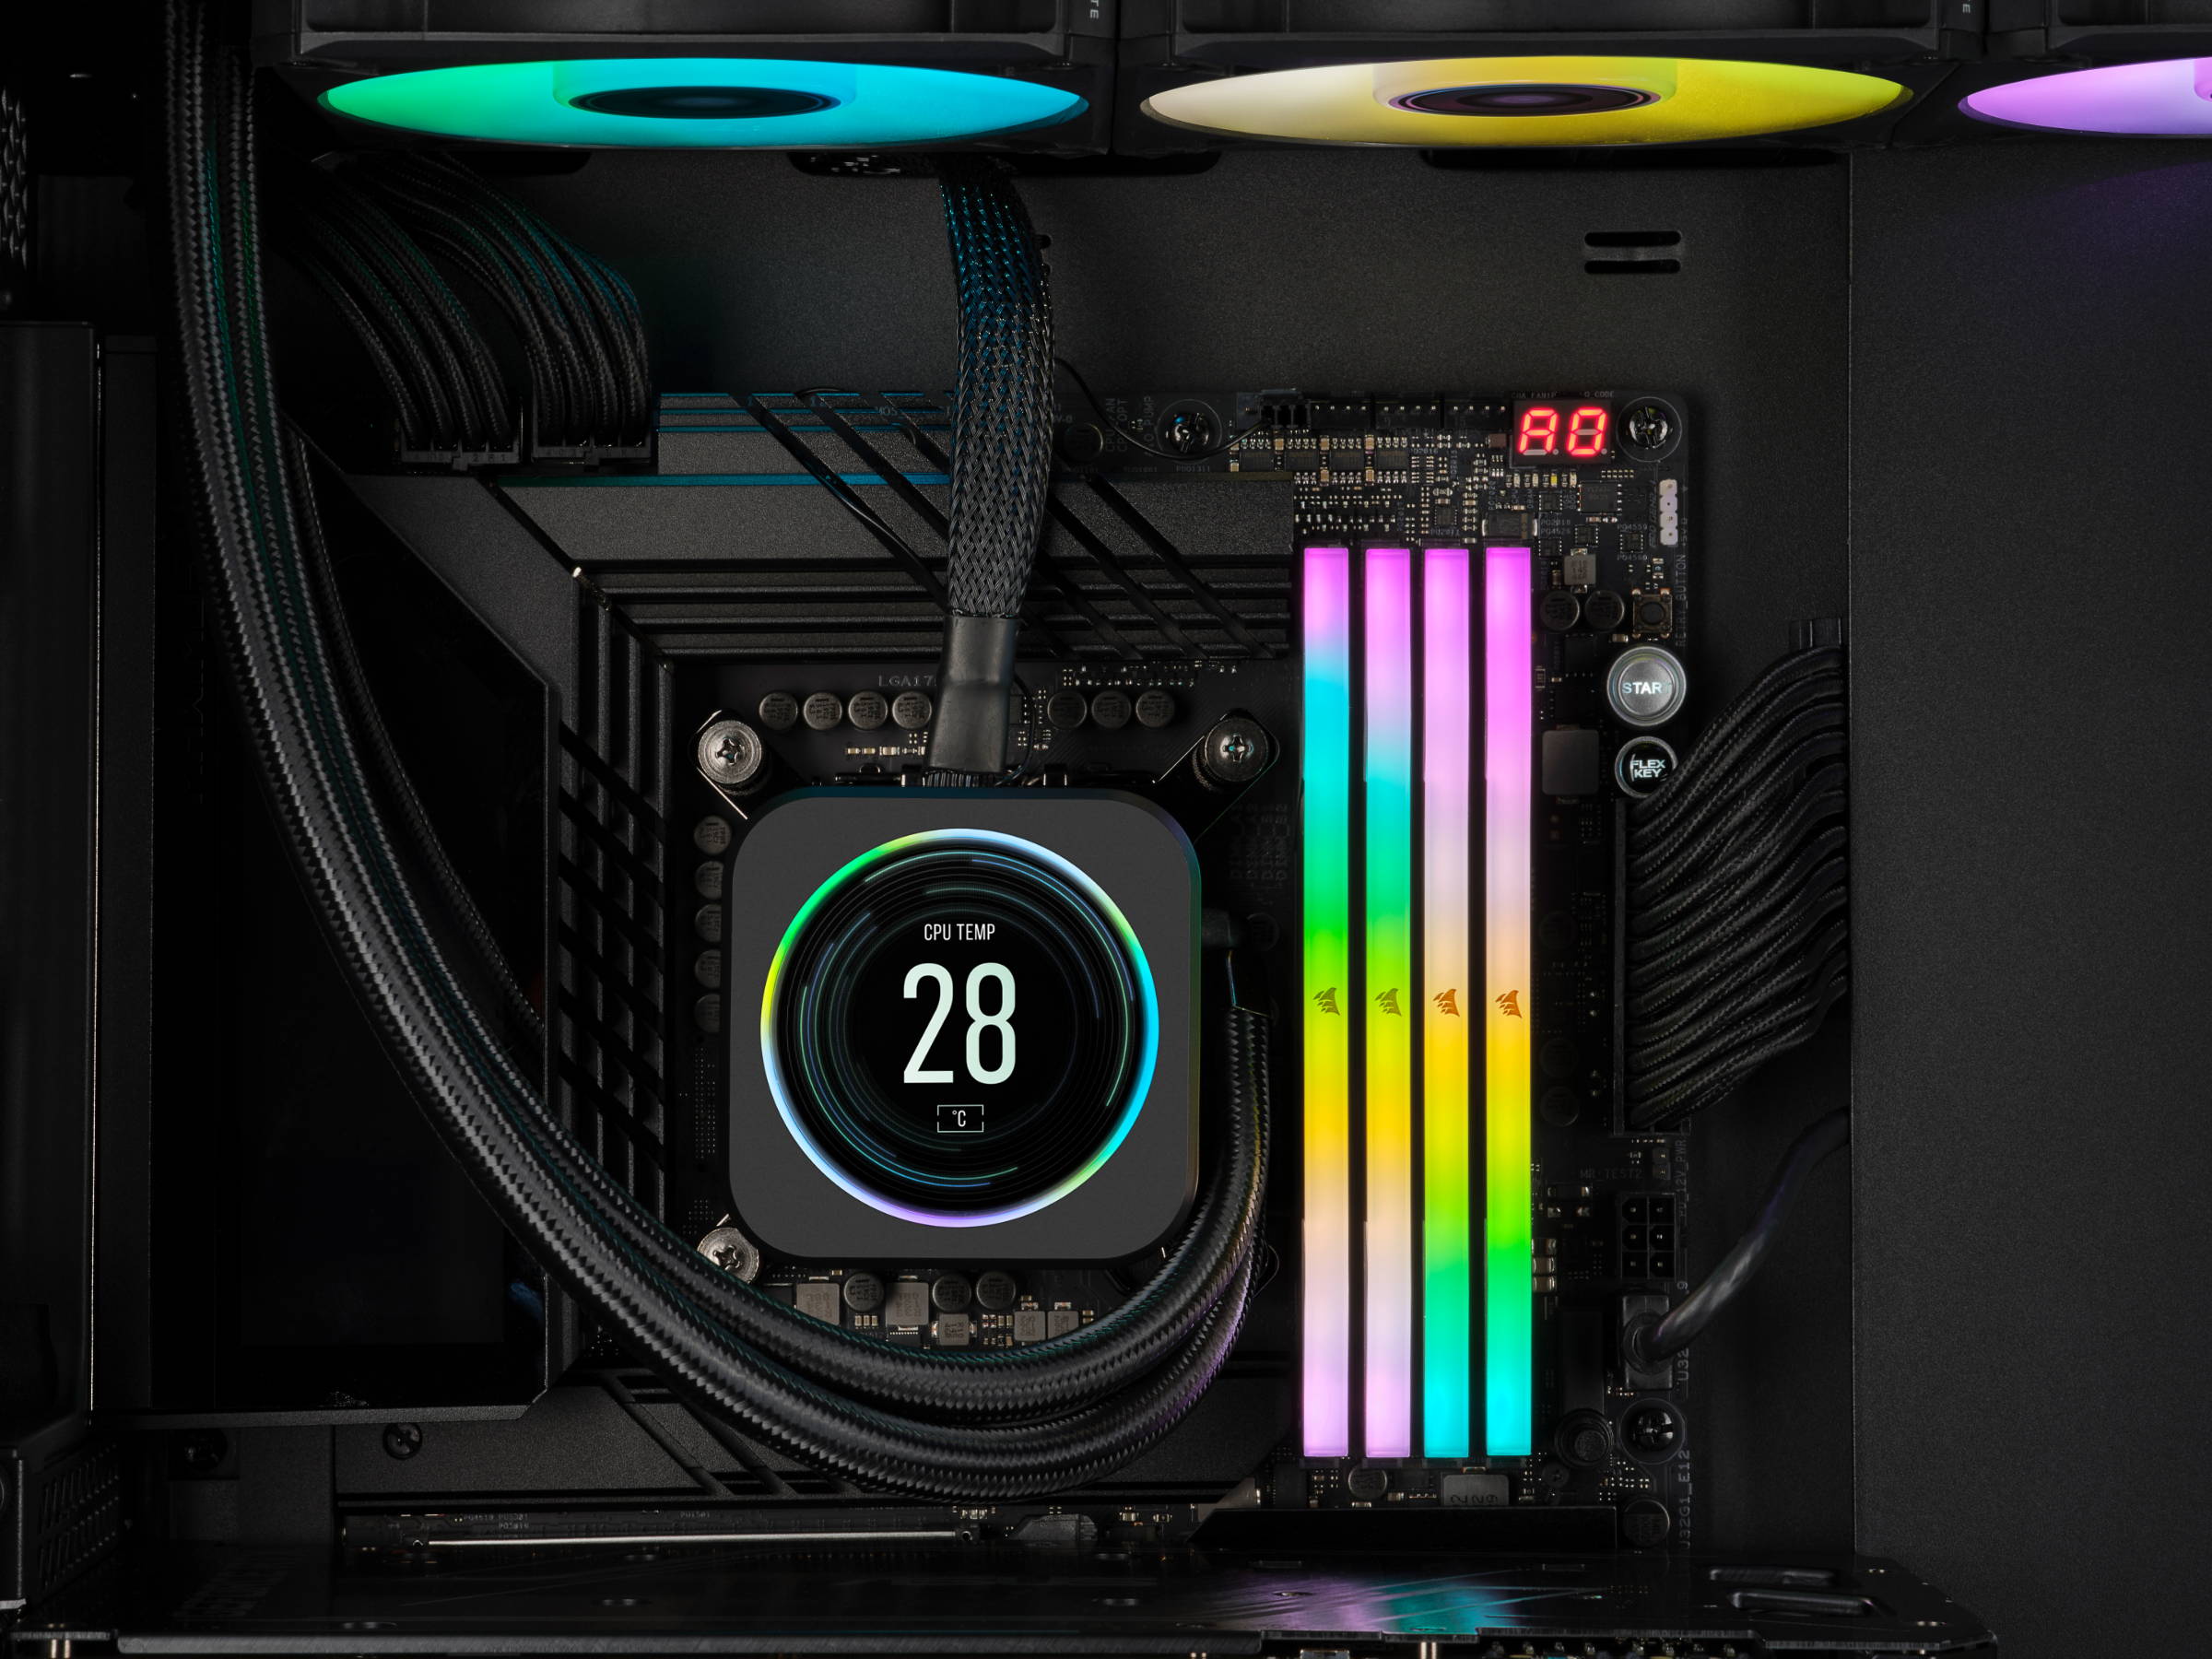 Corsair iCUE – Bringing RGB and Gaming Power Together